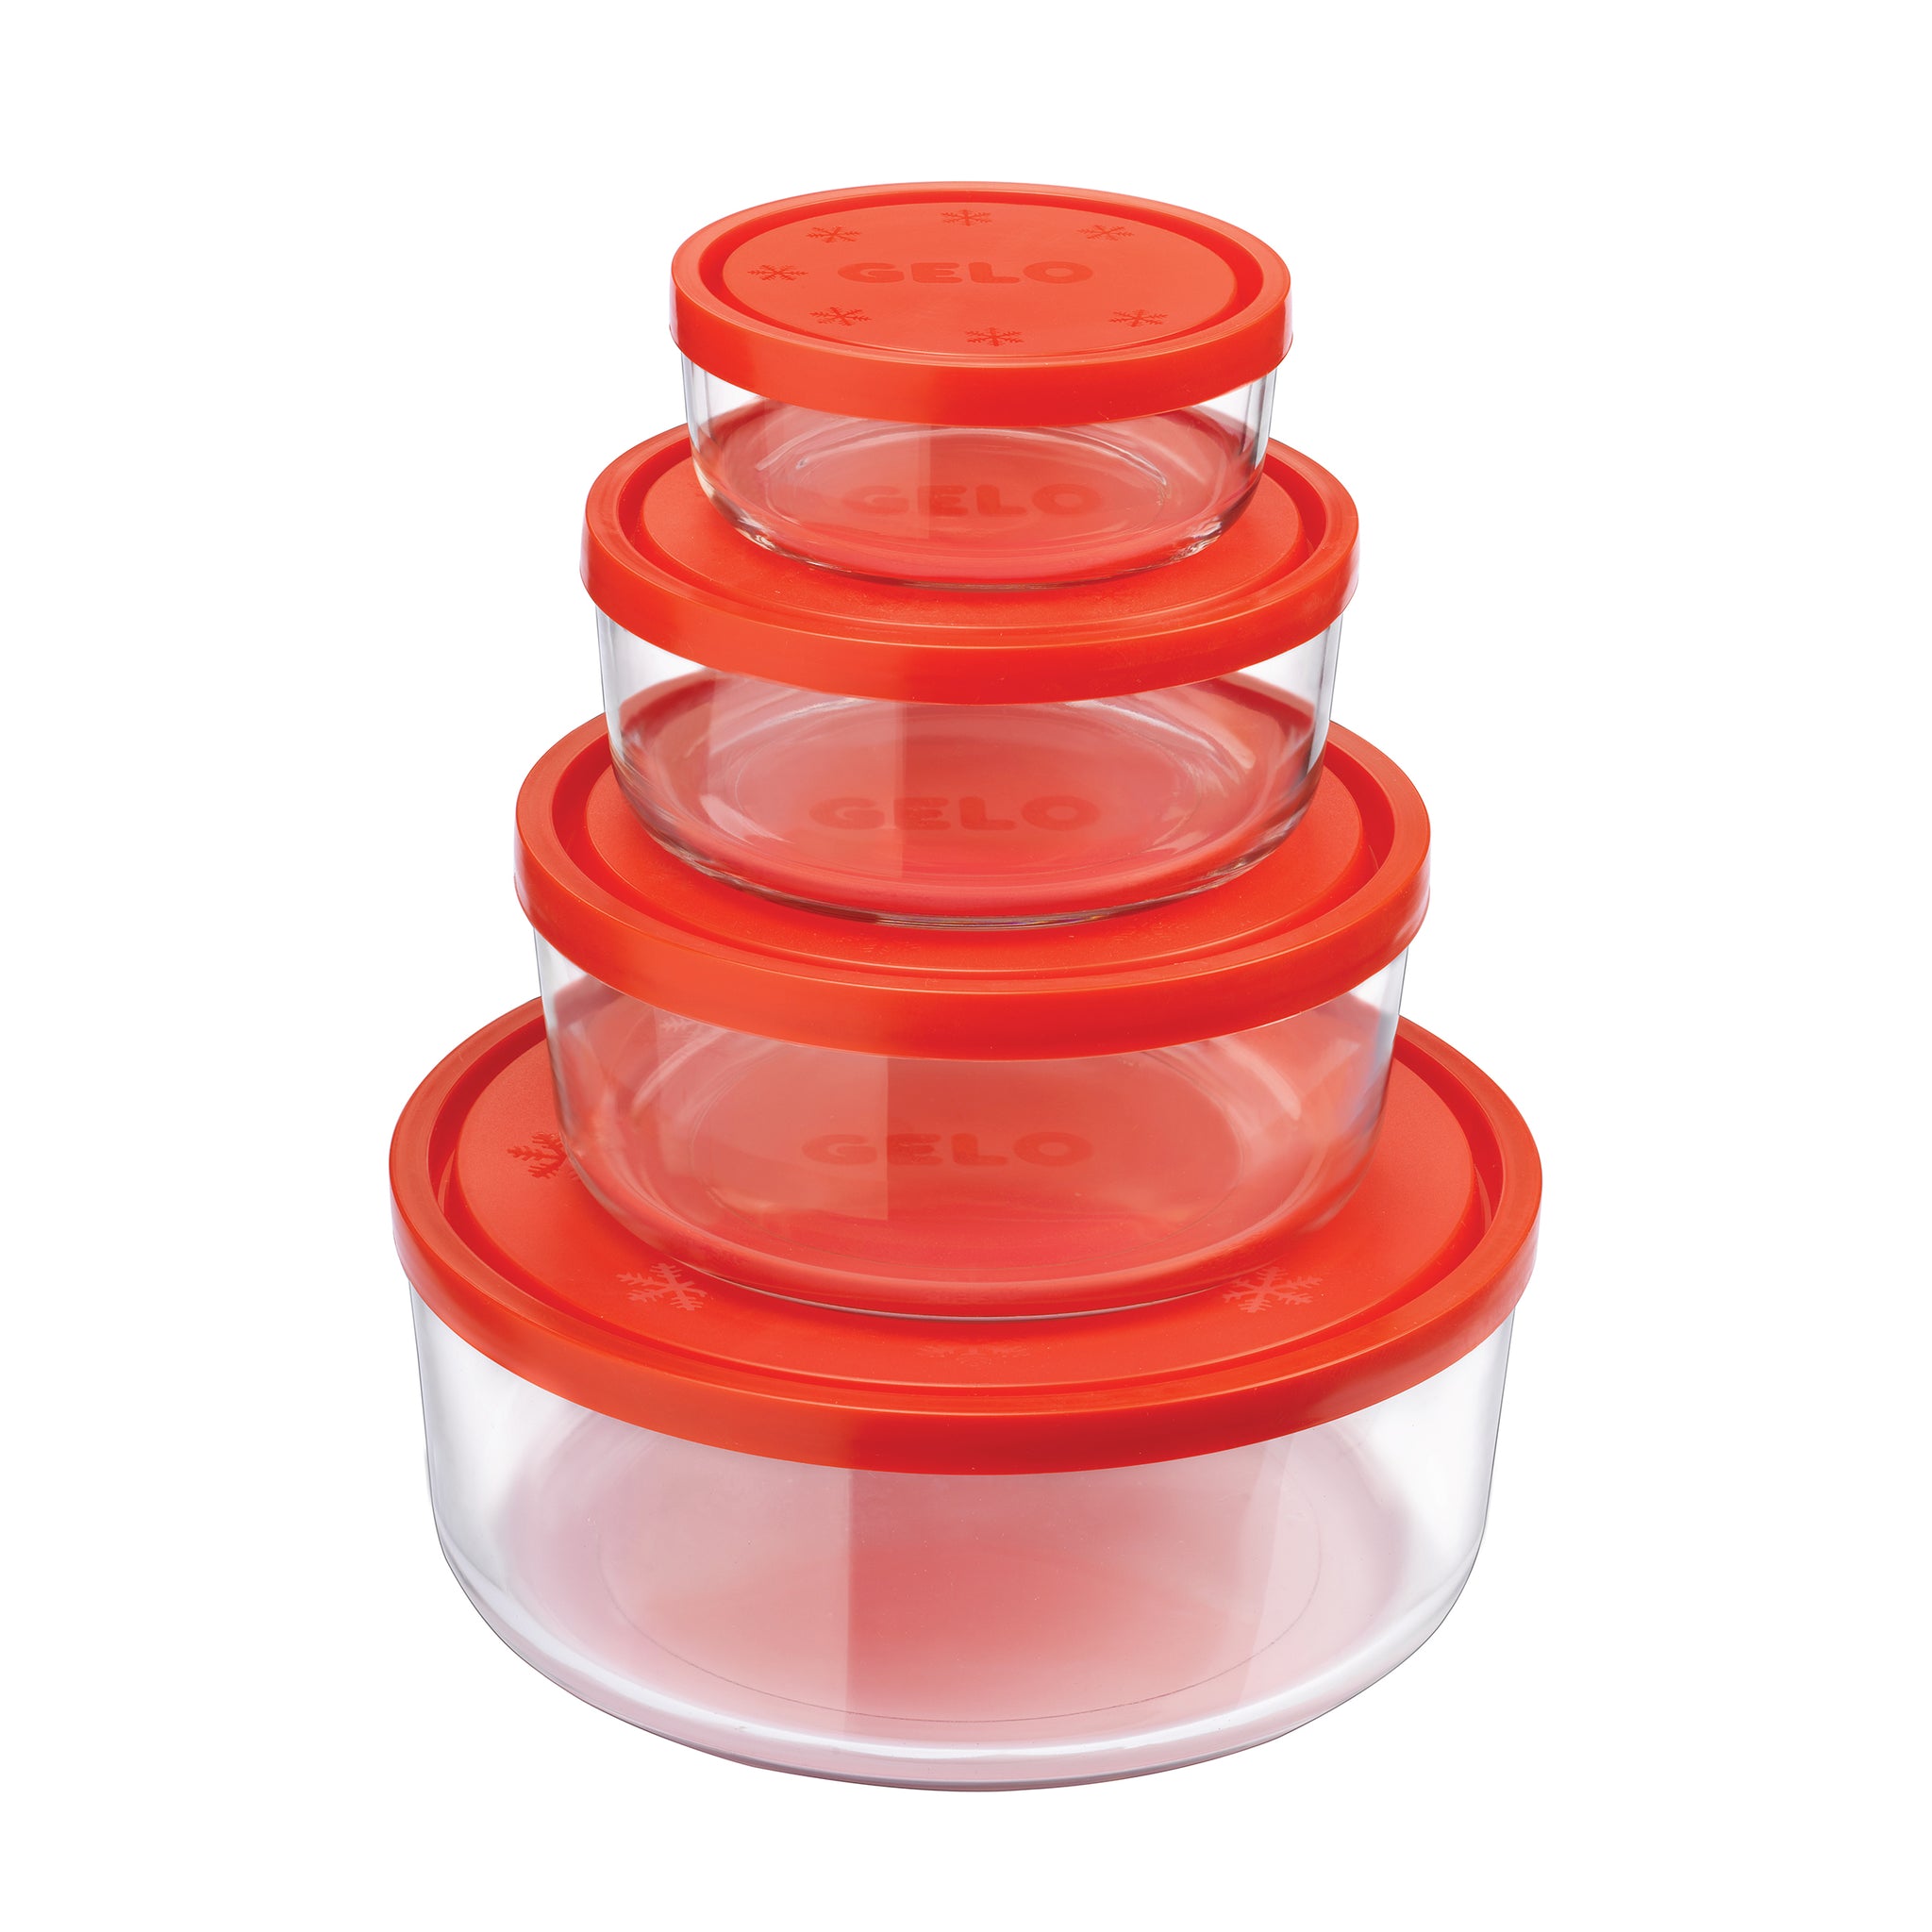 Gelo 4pc Storage Container Set with Red Lid (8.25 oz., 20.25 oz., 37.25 oz. & 81 oz.)